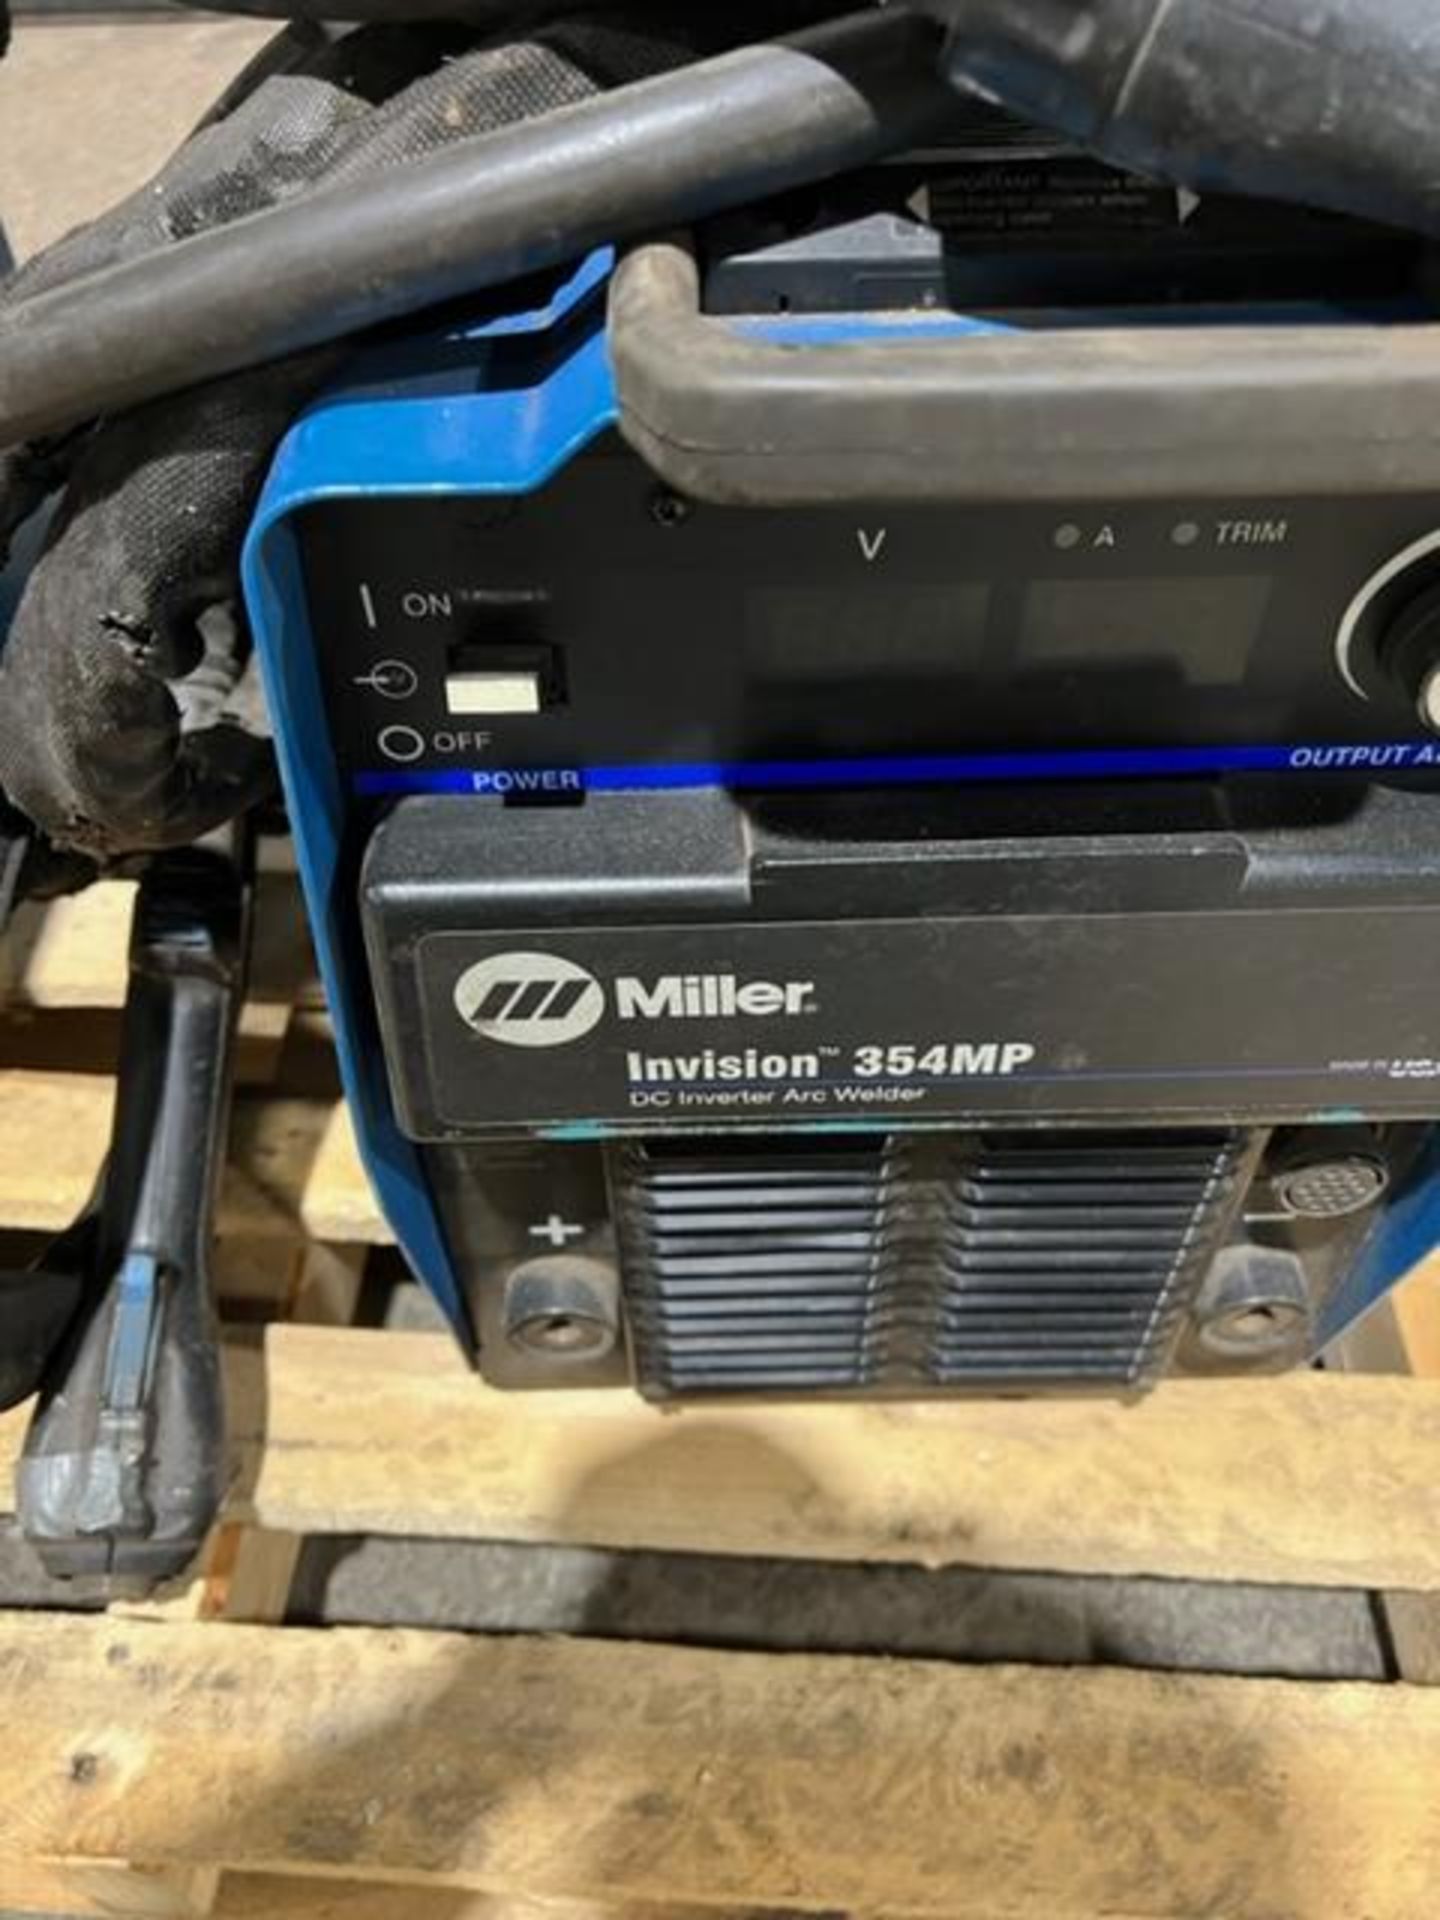 Miller Invision 354MP Welder with XR Control Wire Feeder with Push & Push Gun - 350 amp unit - 1 & 3 - Image 2 of 3